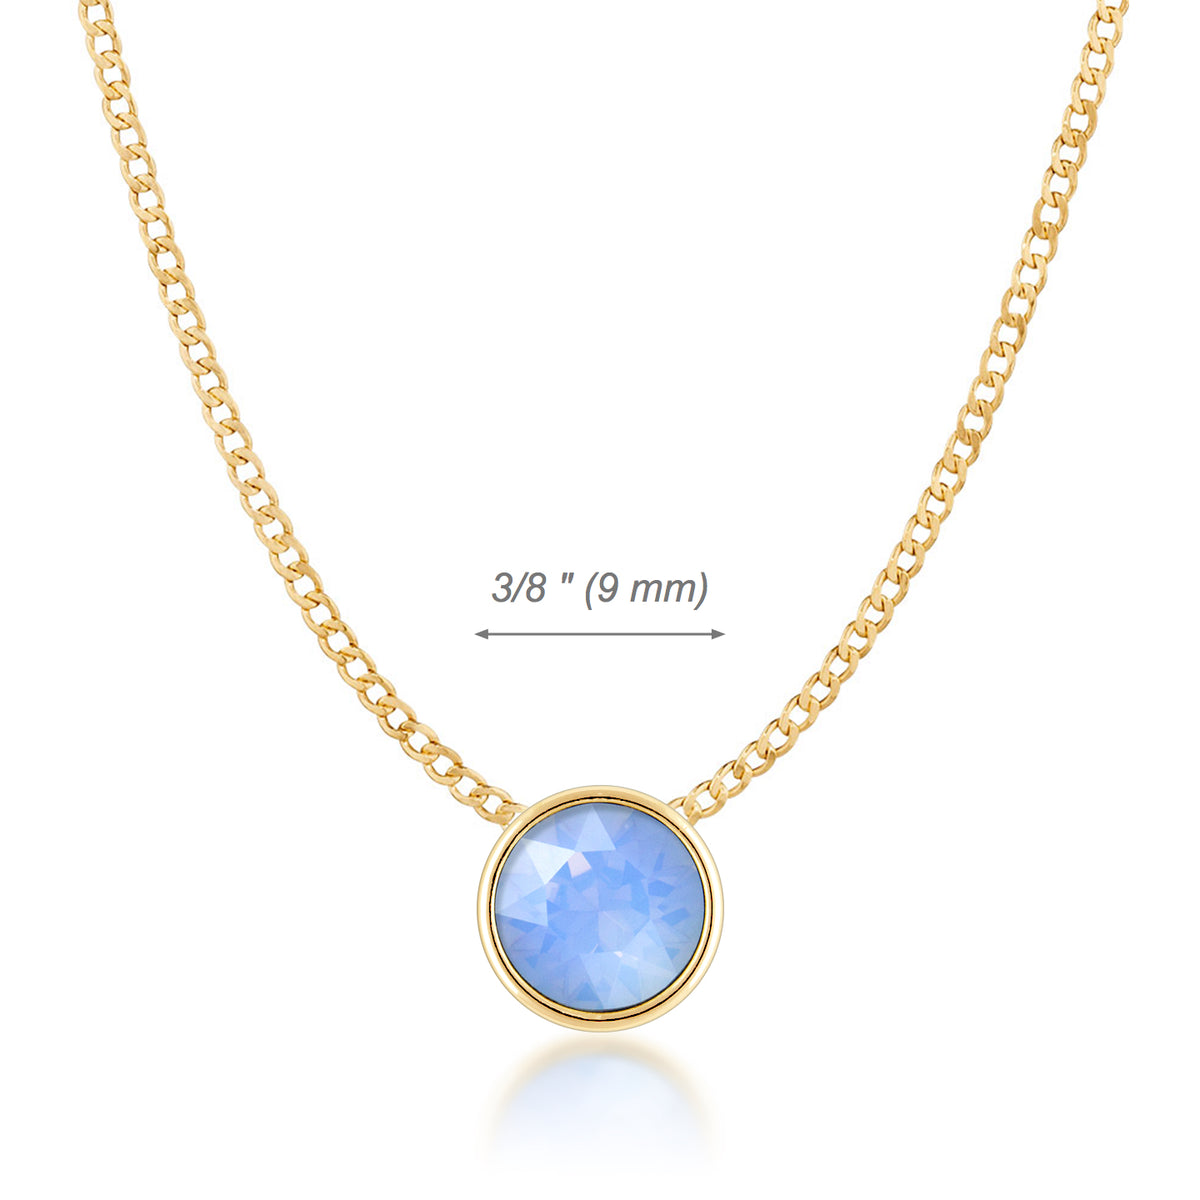 Harley Small Pendant Necklace with Air Blue Round Opals from Swarovski Gold Plated - Ed Heart